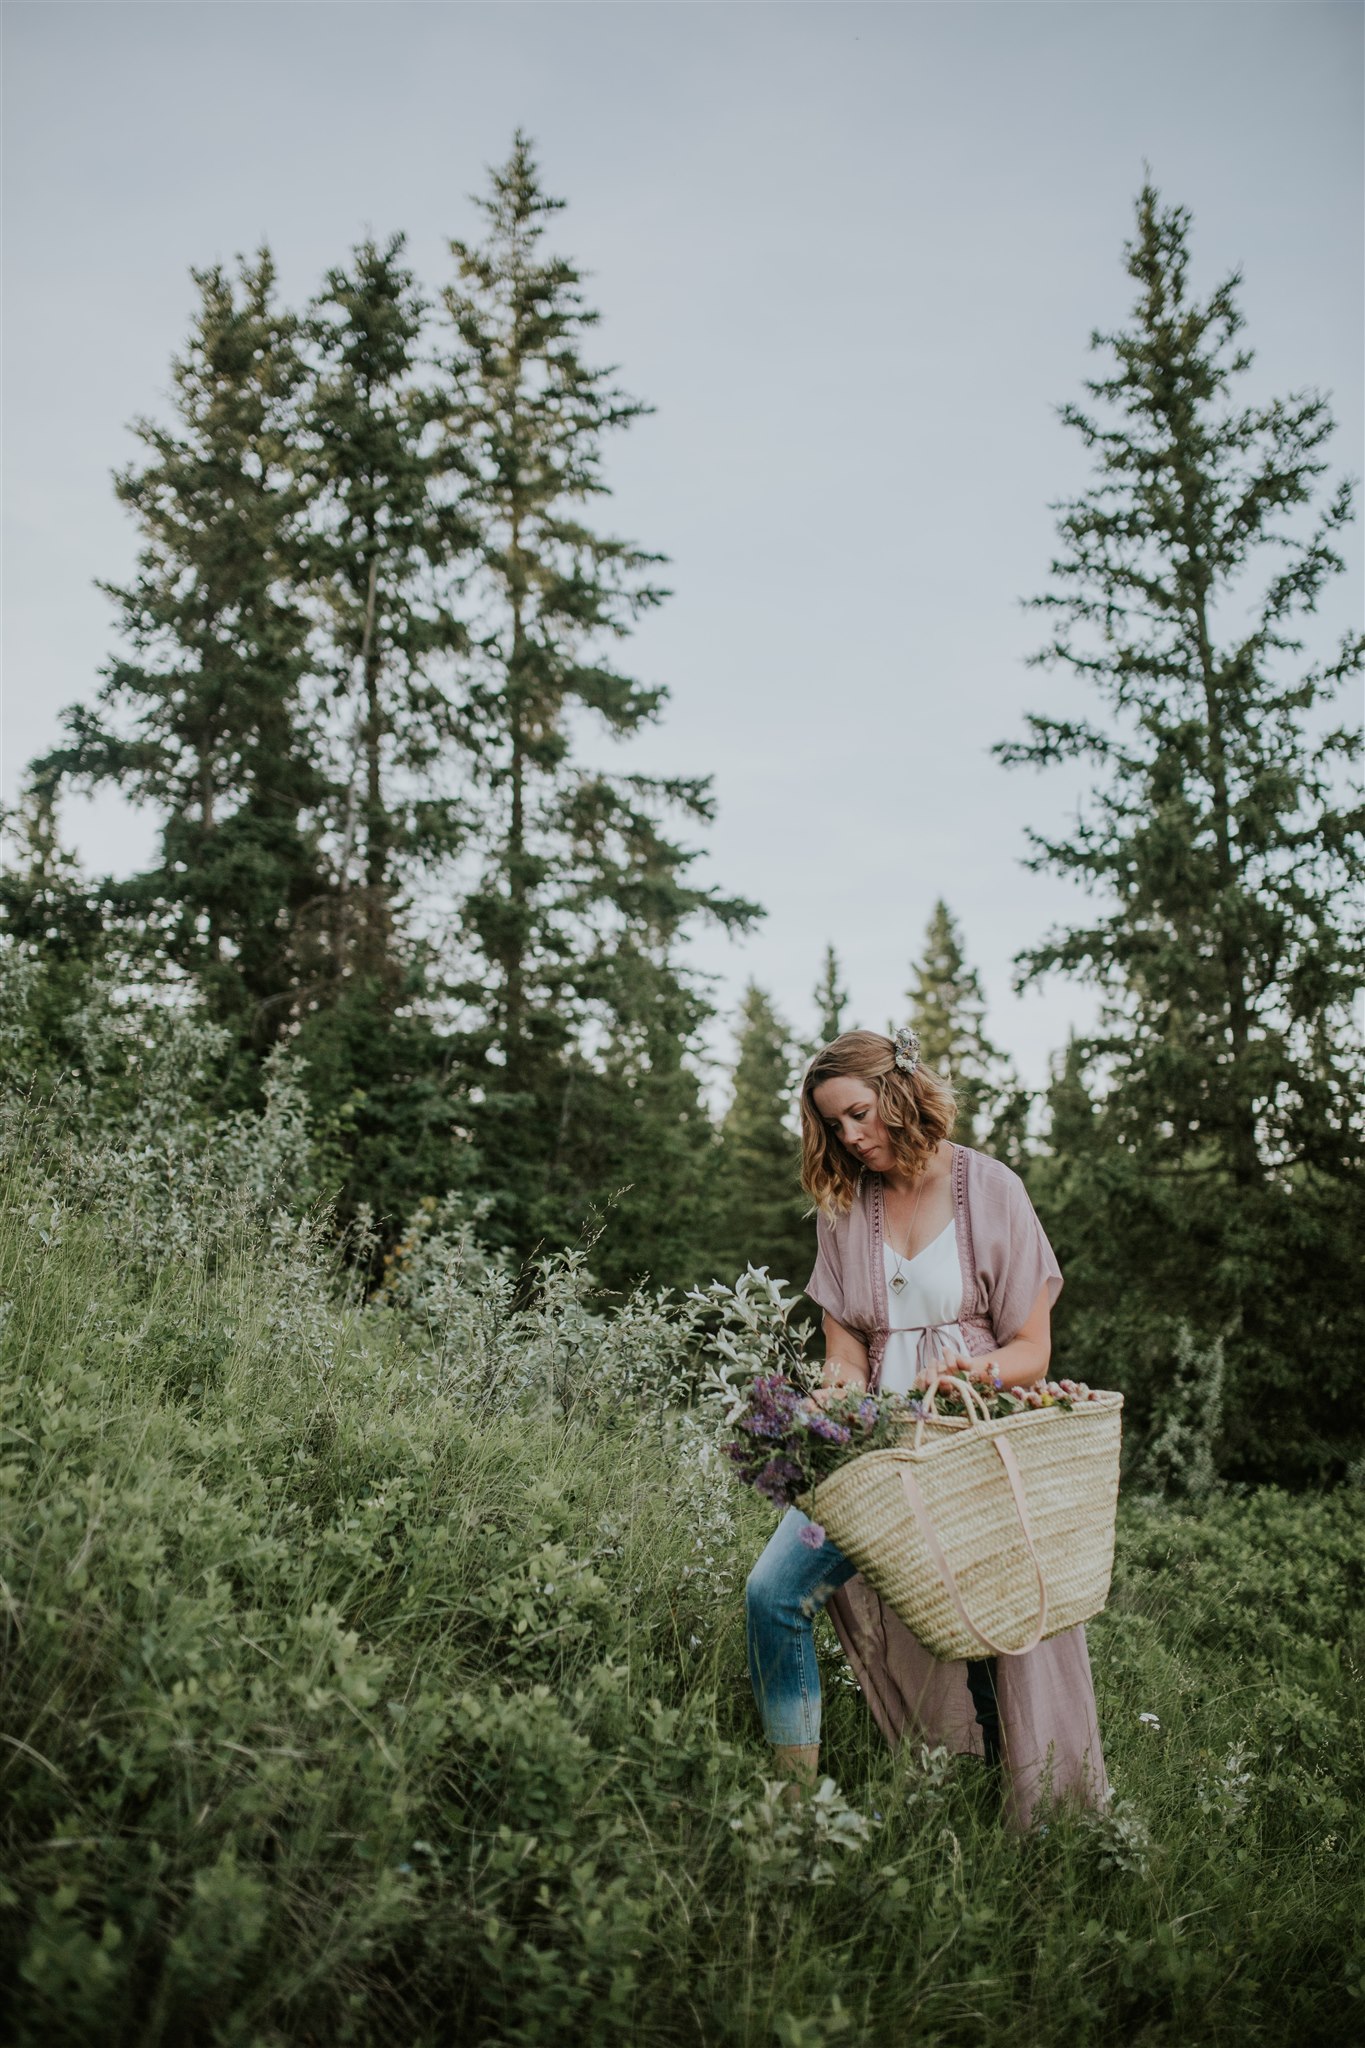 A portrait-oriented image featuring a person holding a basket in a natural setting.